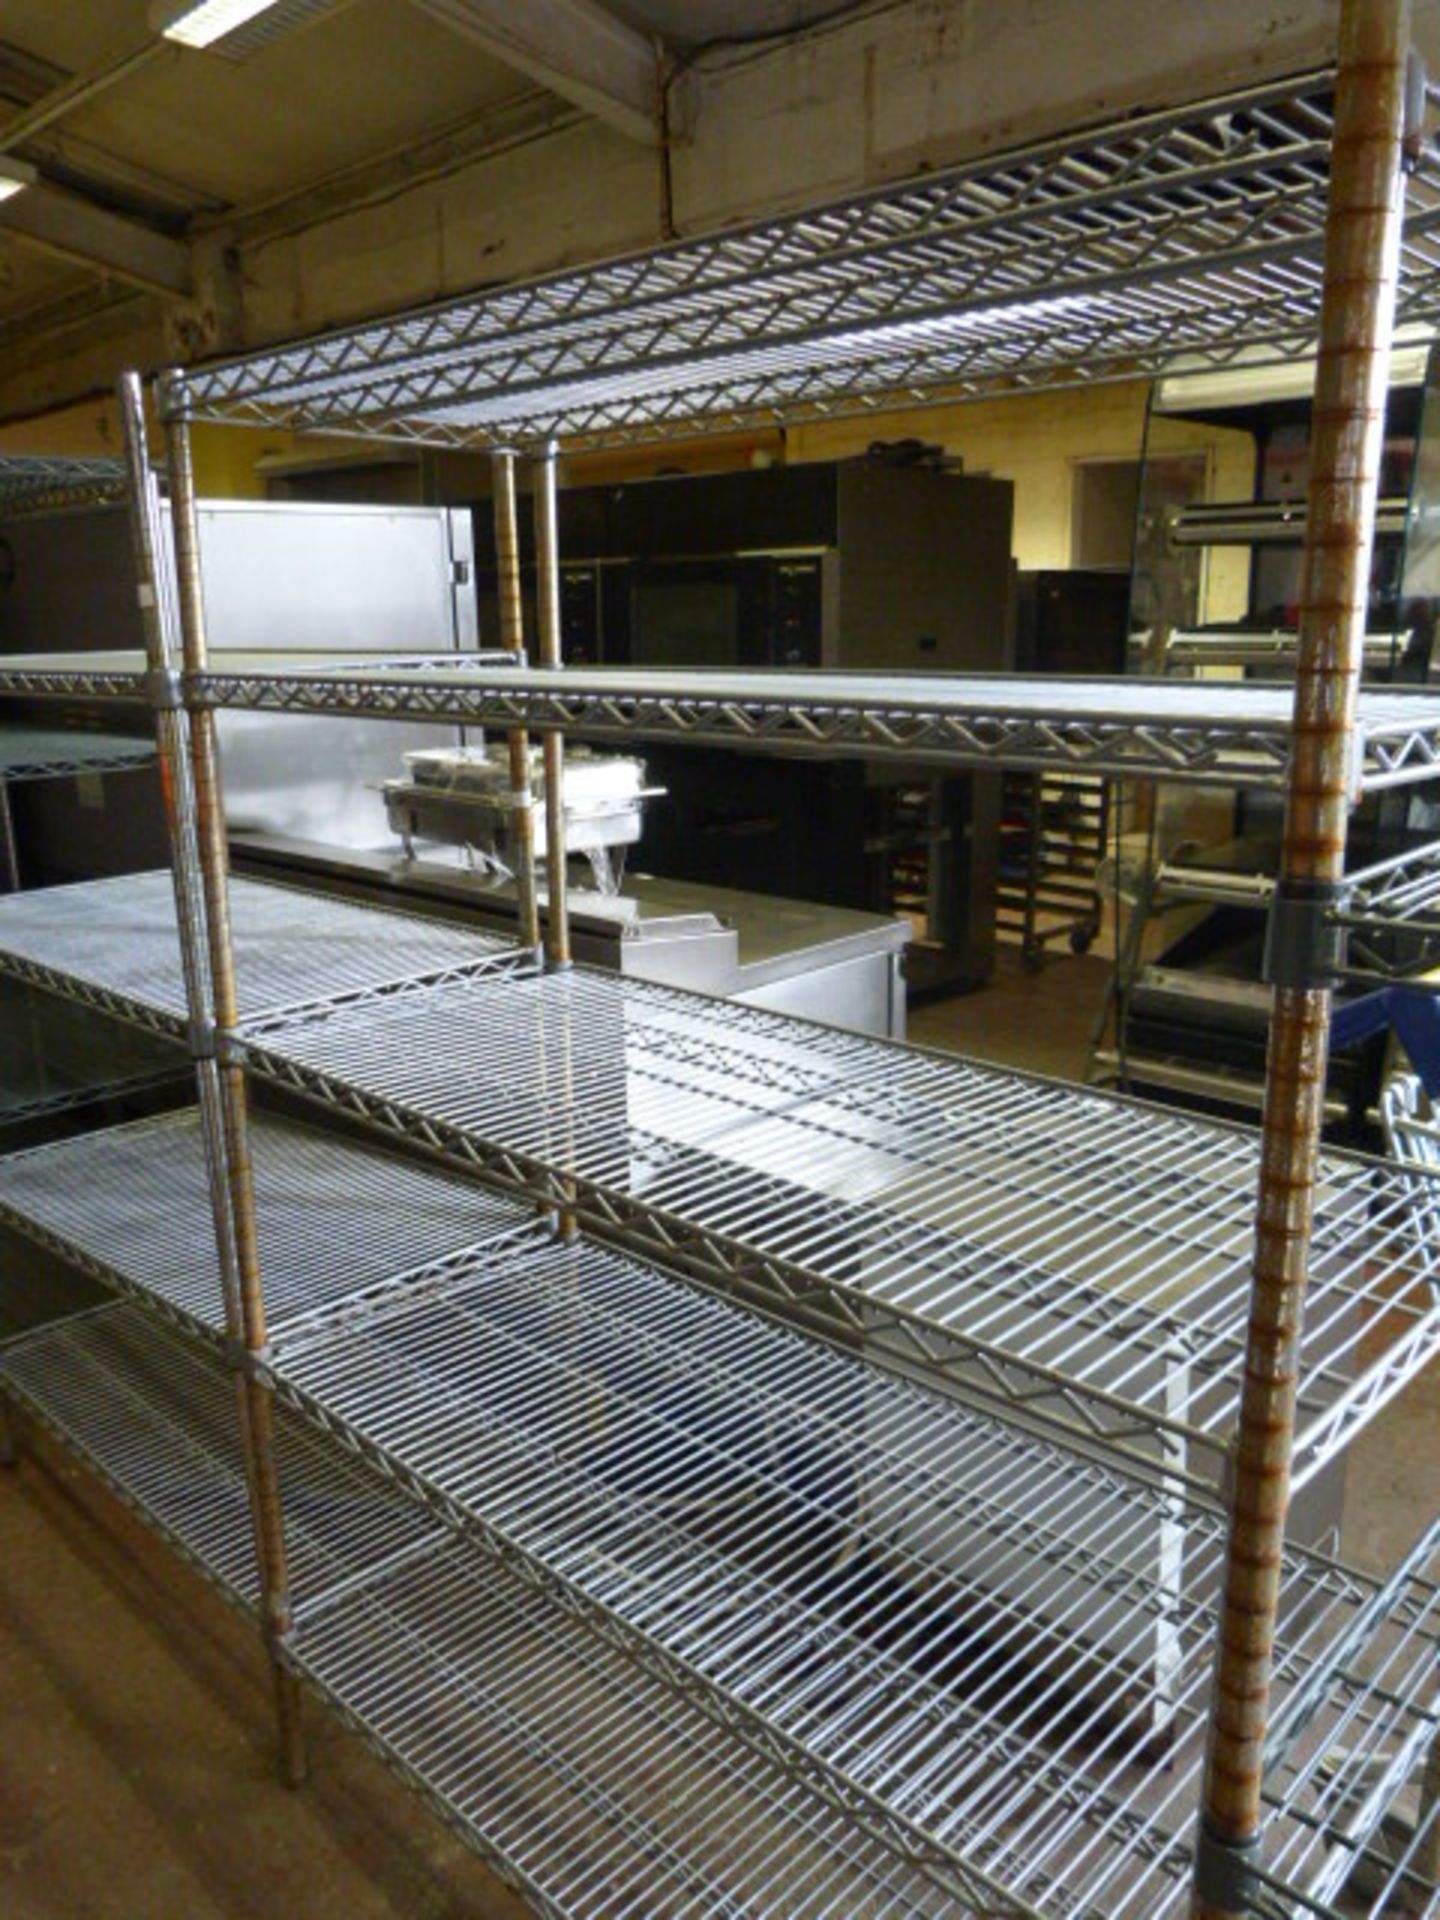 *Section of Five Tier Racking